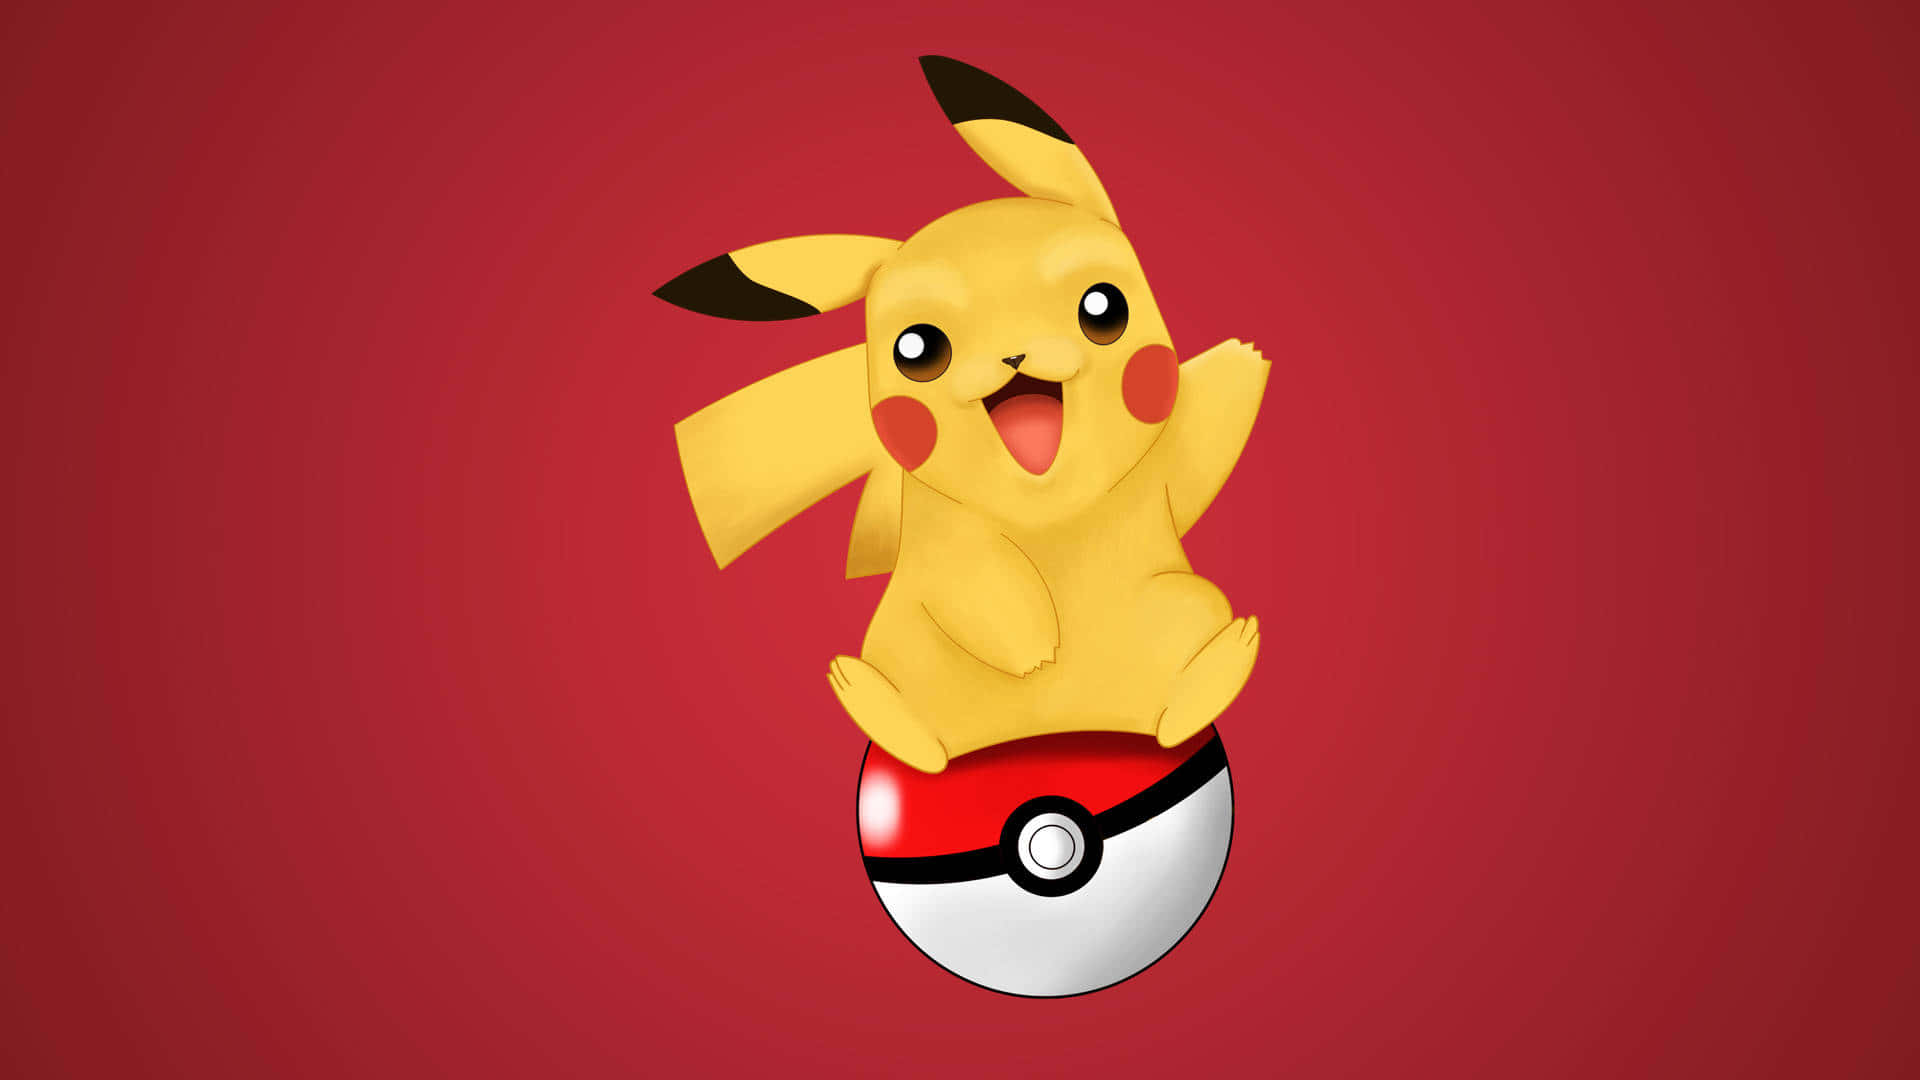 This cute Pikachu is full of energy and making a funny face